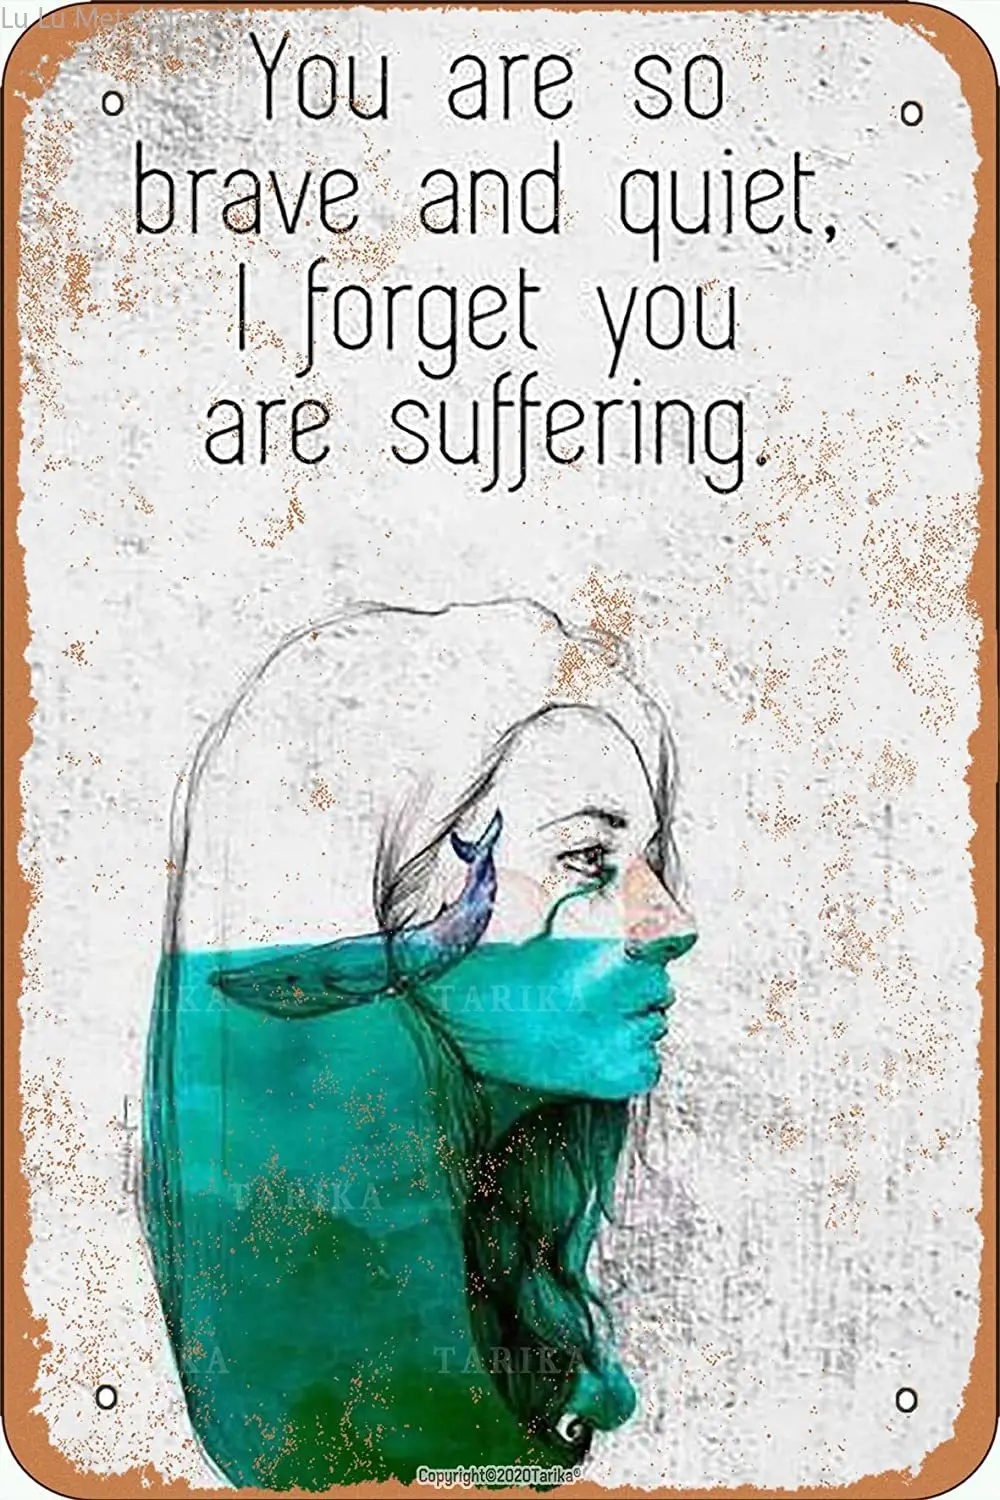 

Tarika You Are So Brave And Quiet I Forget You Are Suffering 20X30 Inch Metal Retro Look Decoration Plaque Sign